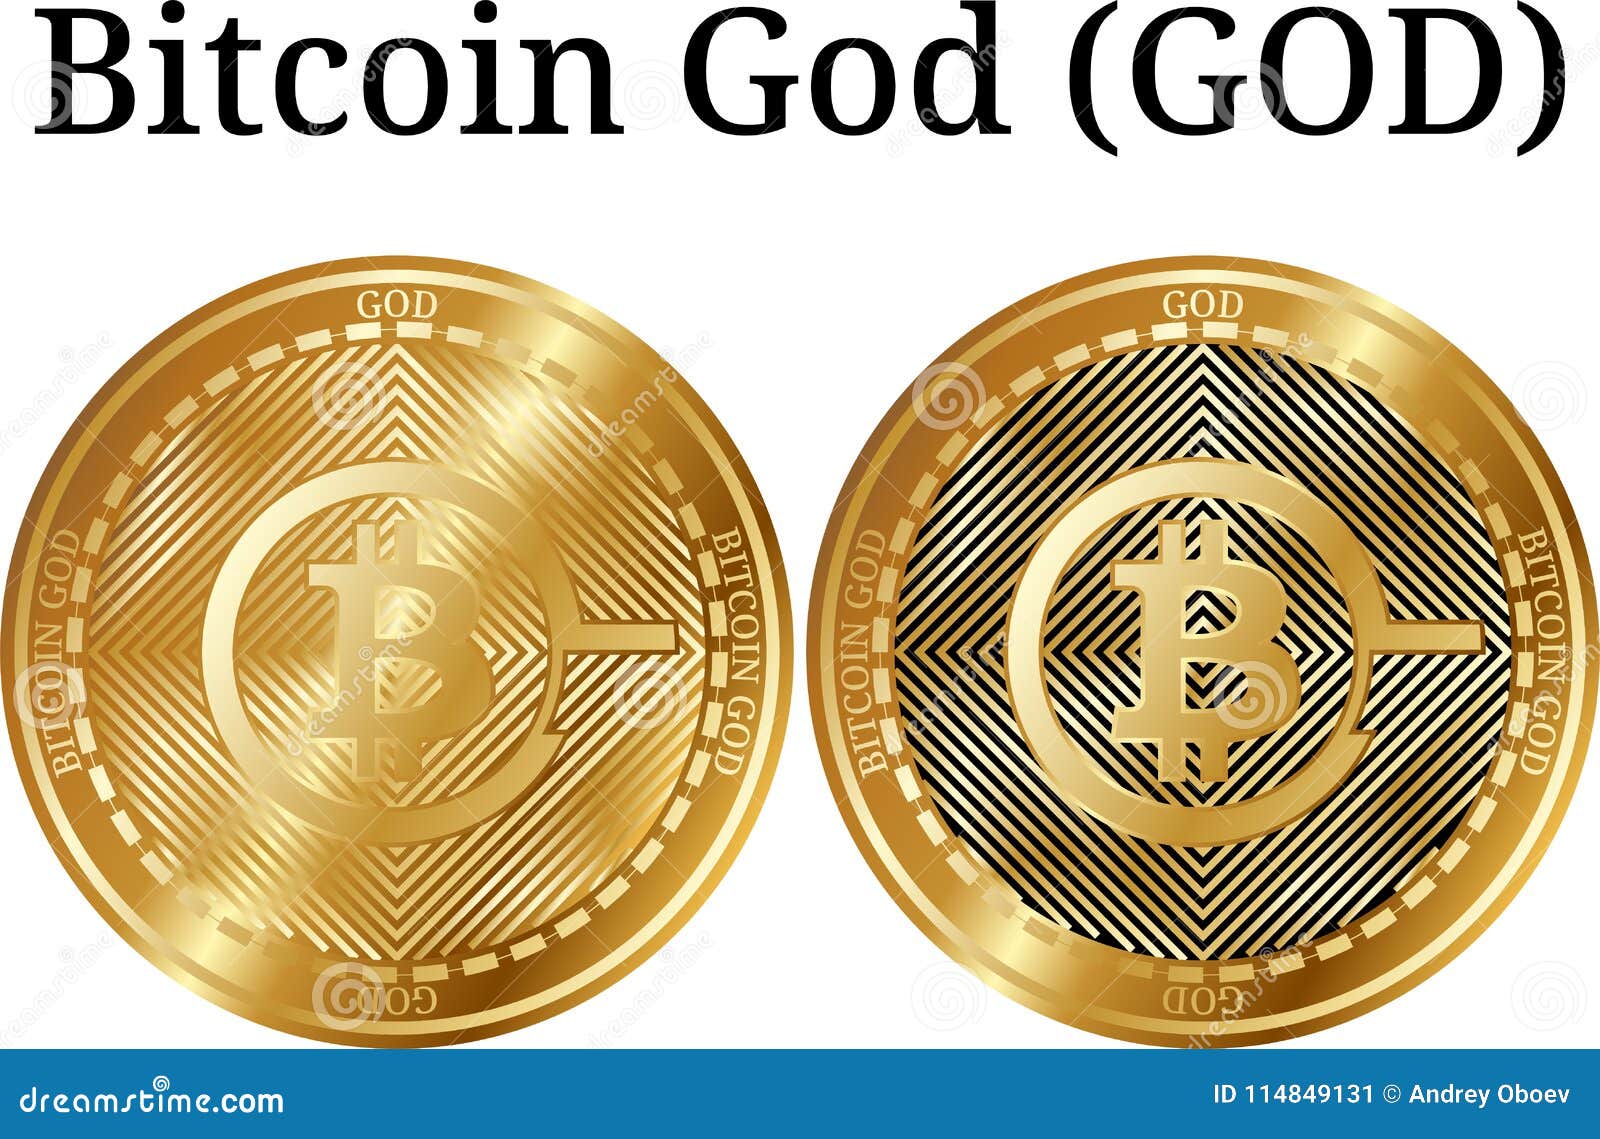 god coin cryptocurrency